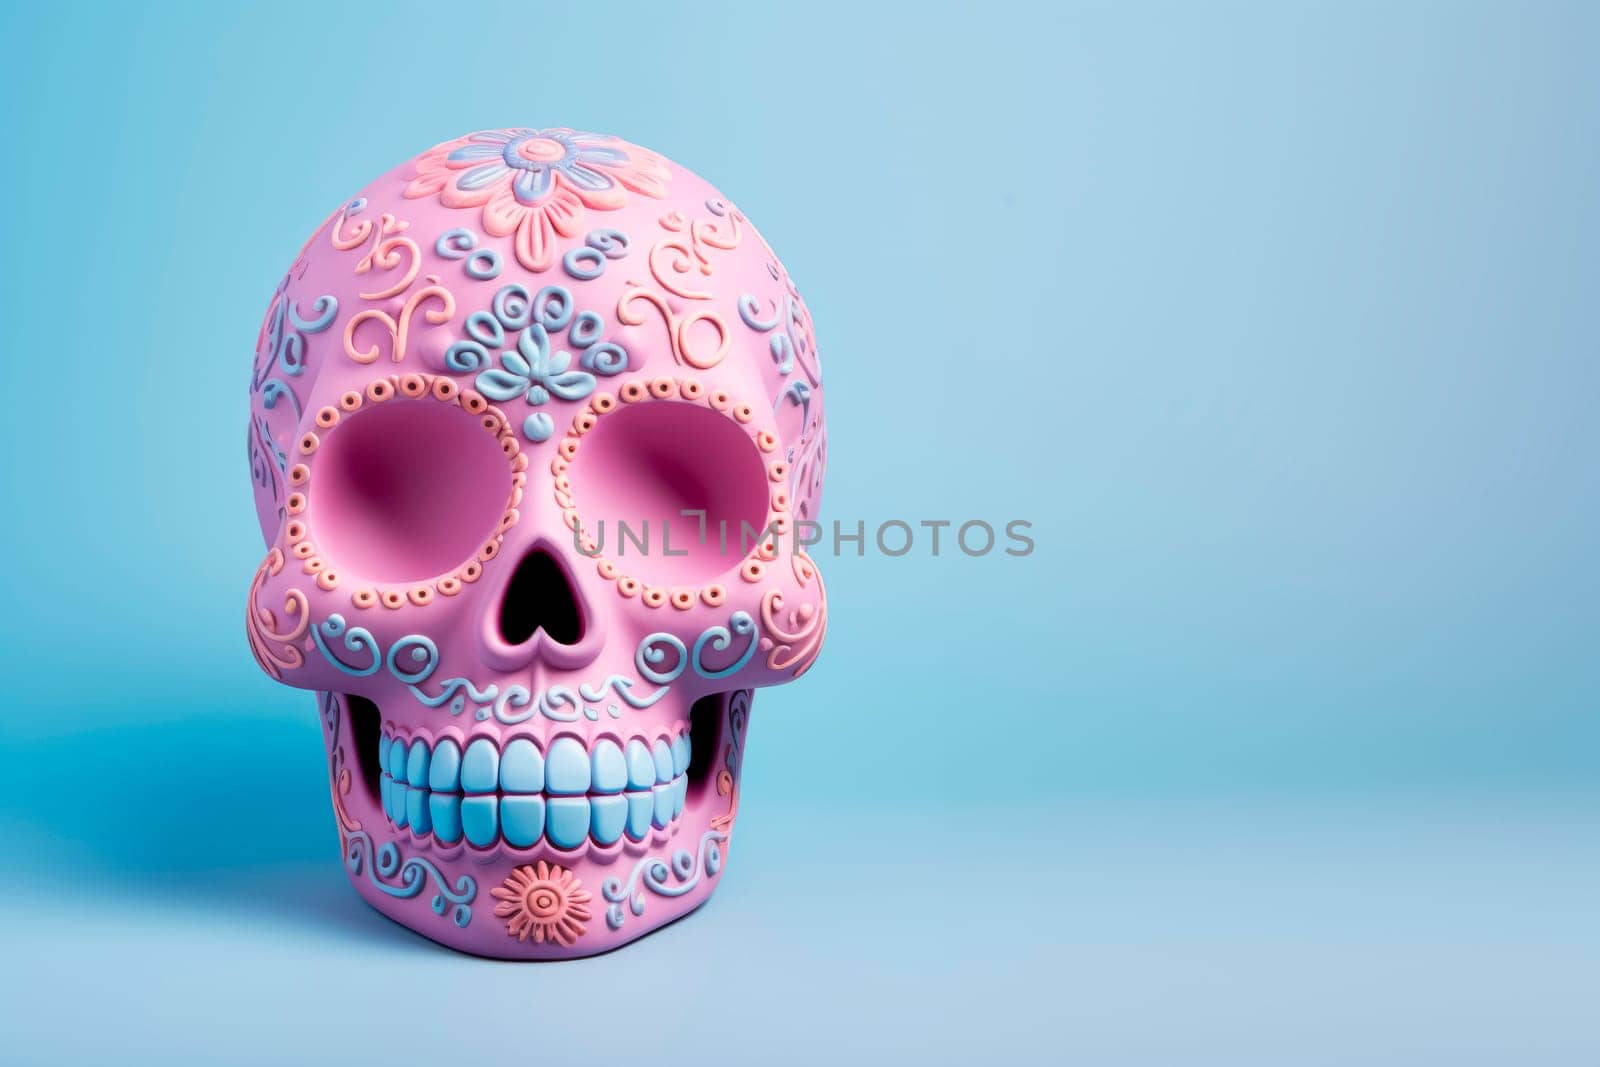 Bright creative skull sugar loaf is made in Mexican traditions. by Spirina